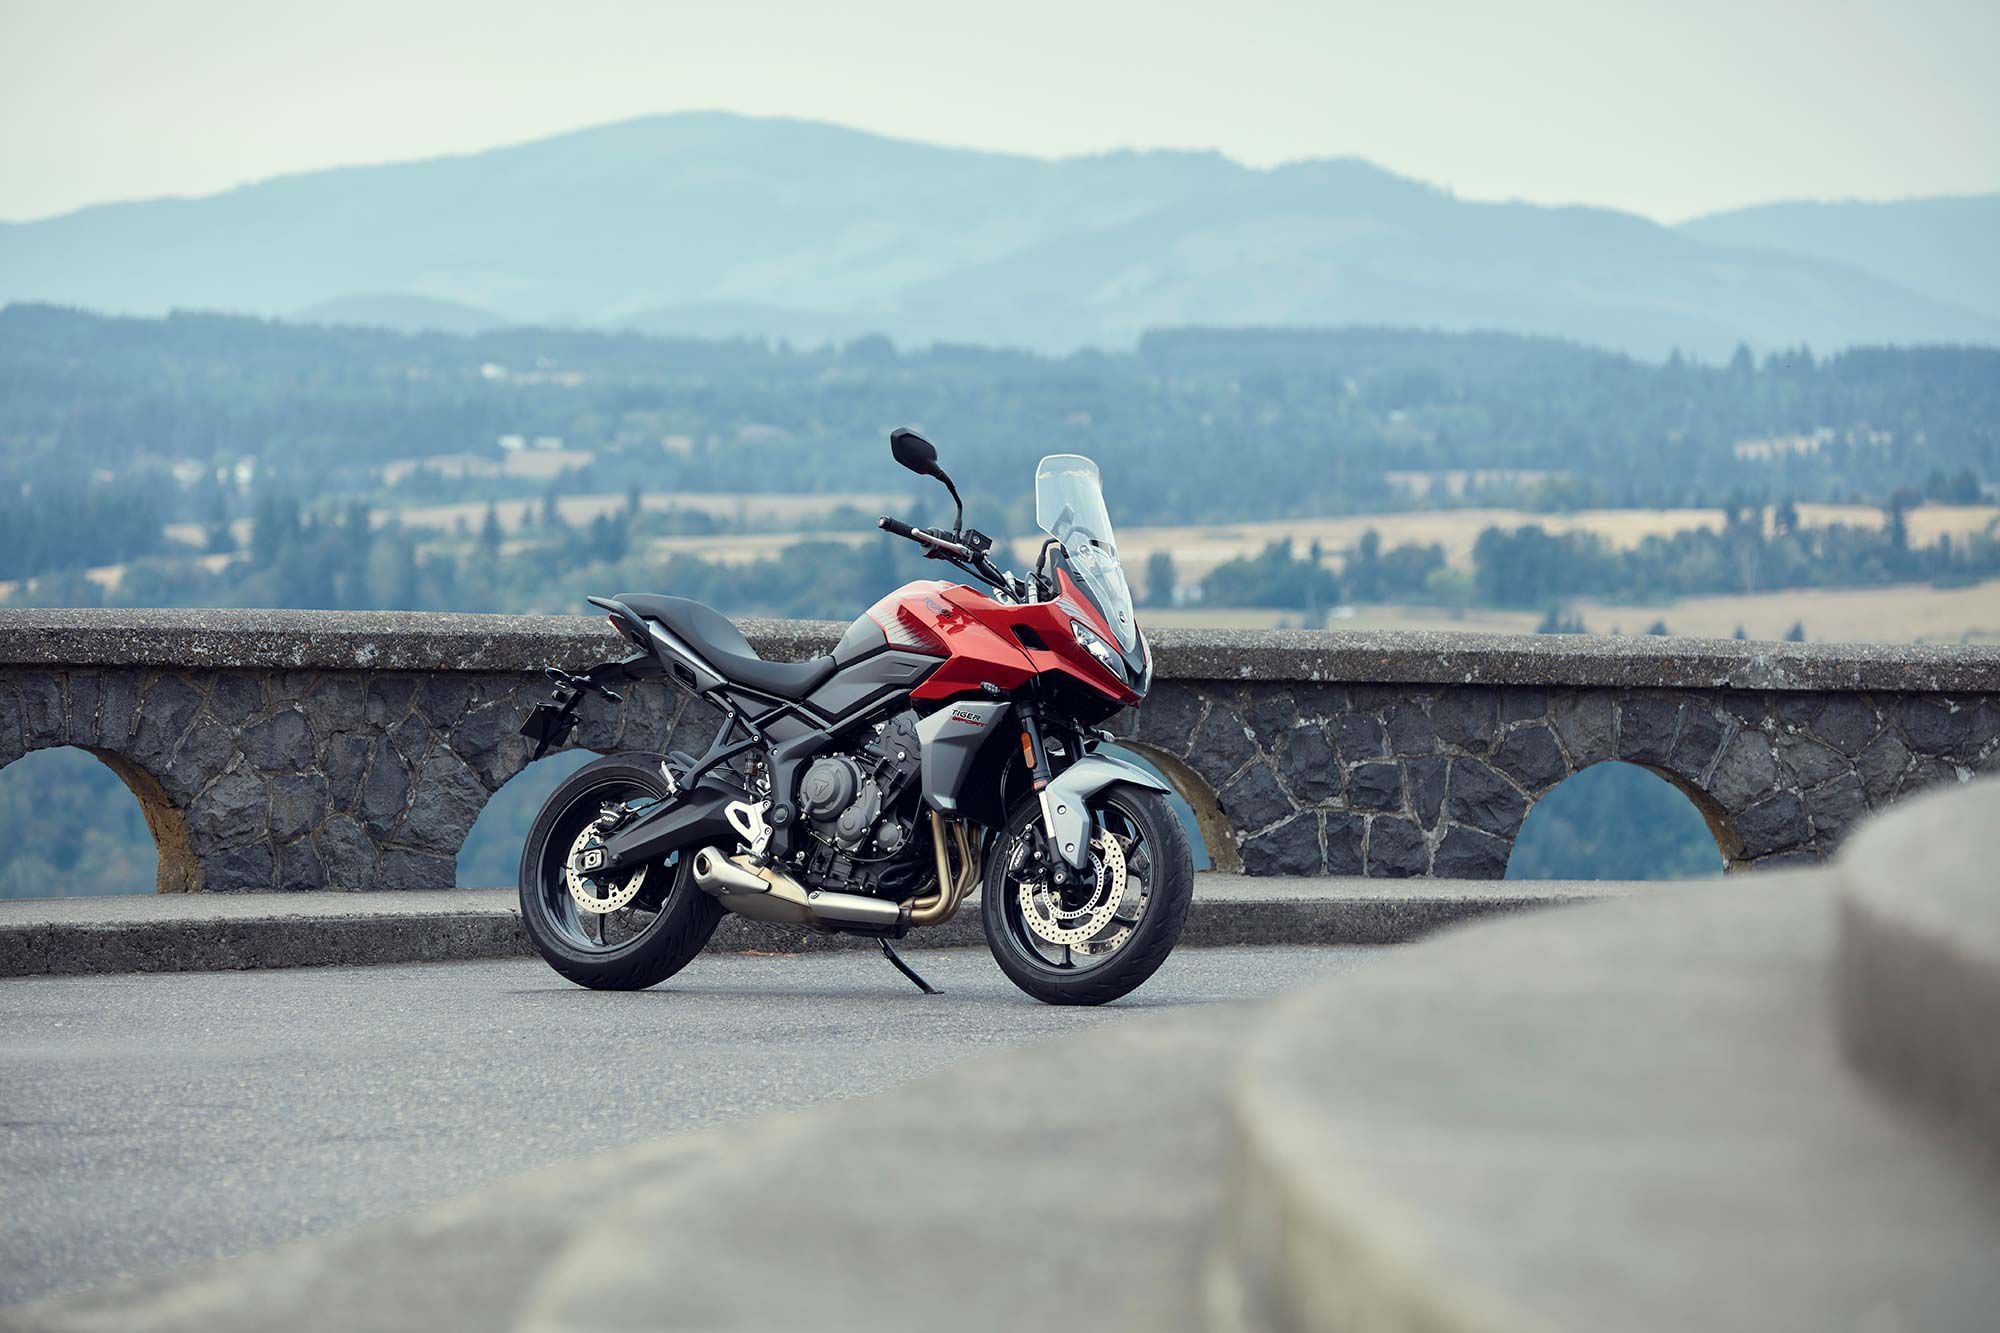 The all-new 2022 Triumph Tiger Sport 660 is expected to hit US dealers in February of 2022 with a starting price of $9,295.